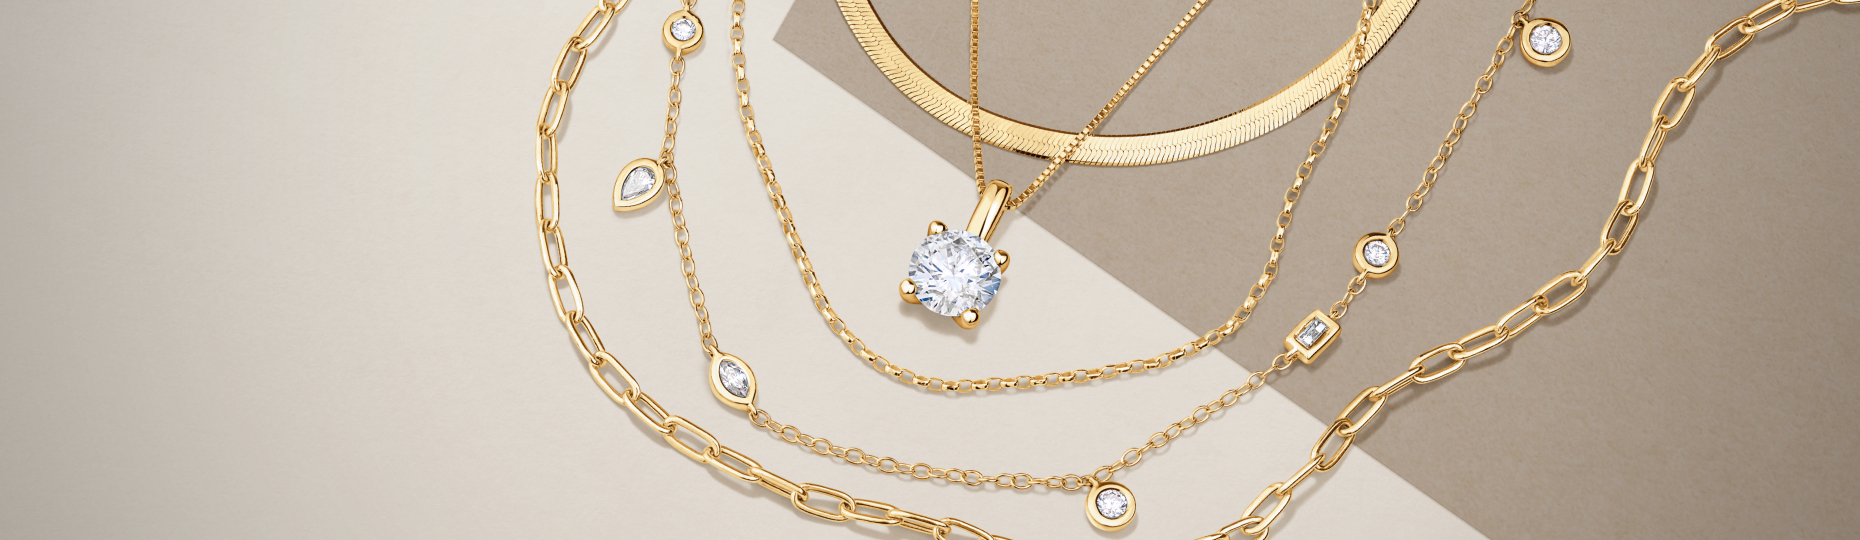 Gold Necklaces & Pendants for Women at Michael Hill Canada